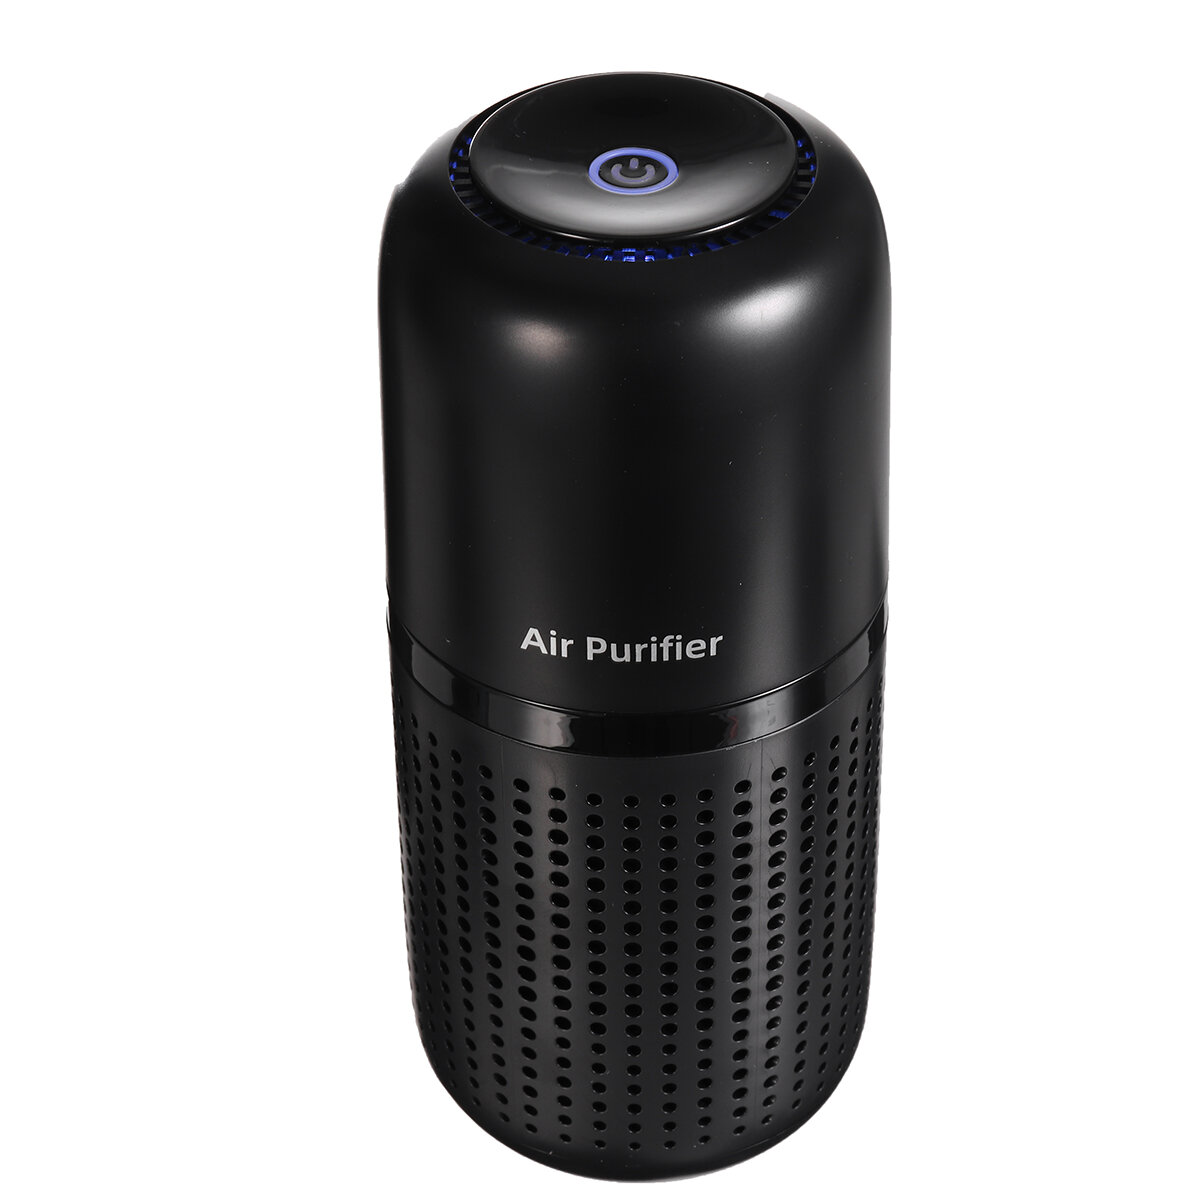 Mini Car Air Purifier 800mAh Battery Life USB Charging Low Noise Removal of Formaldehyde PM2.5 for H